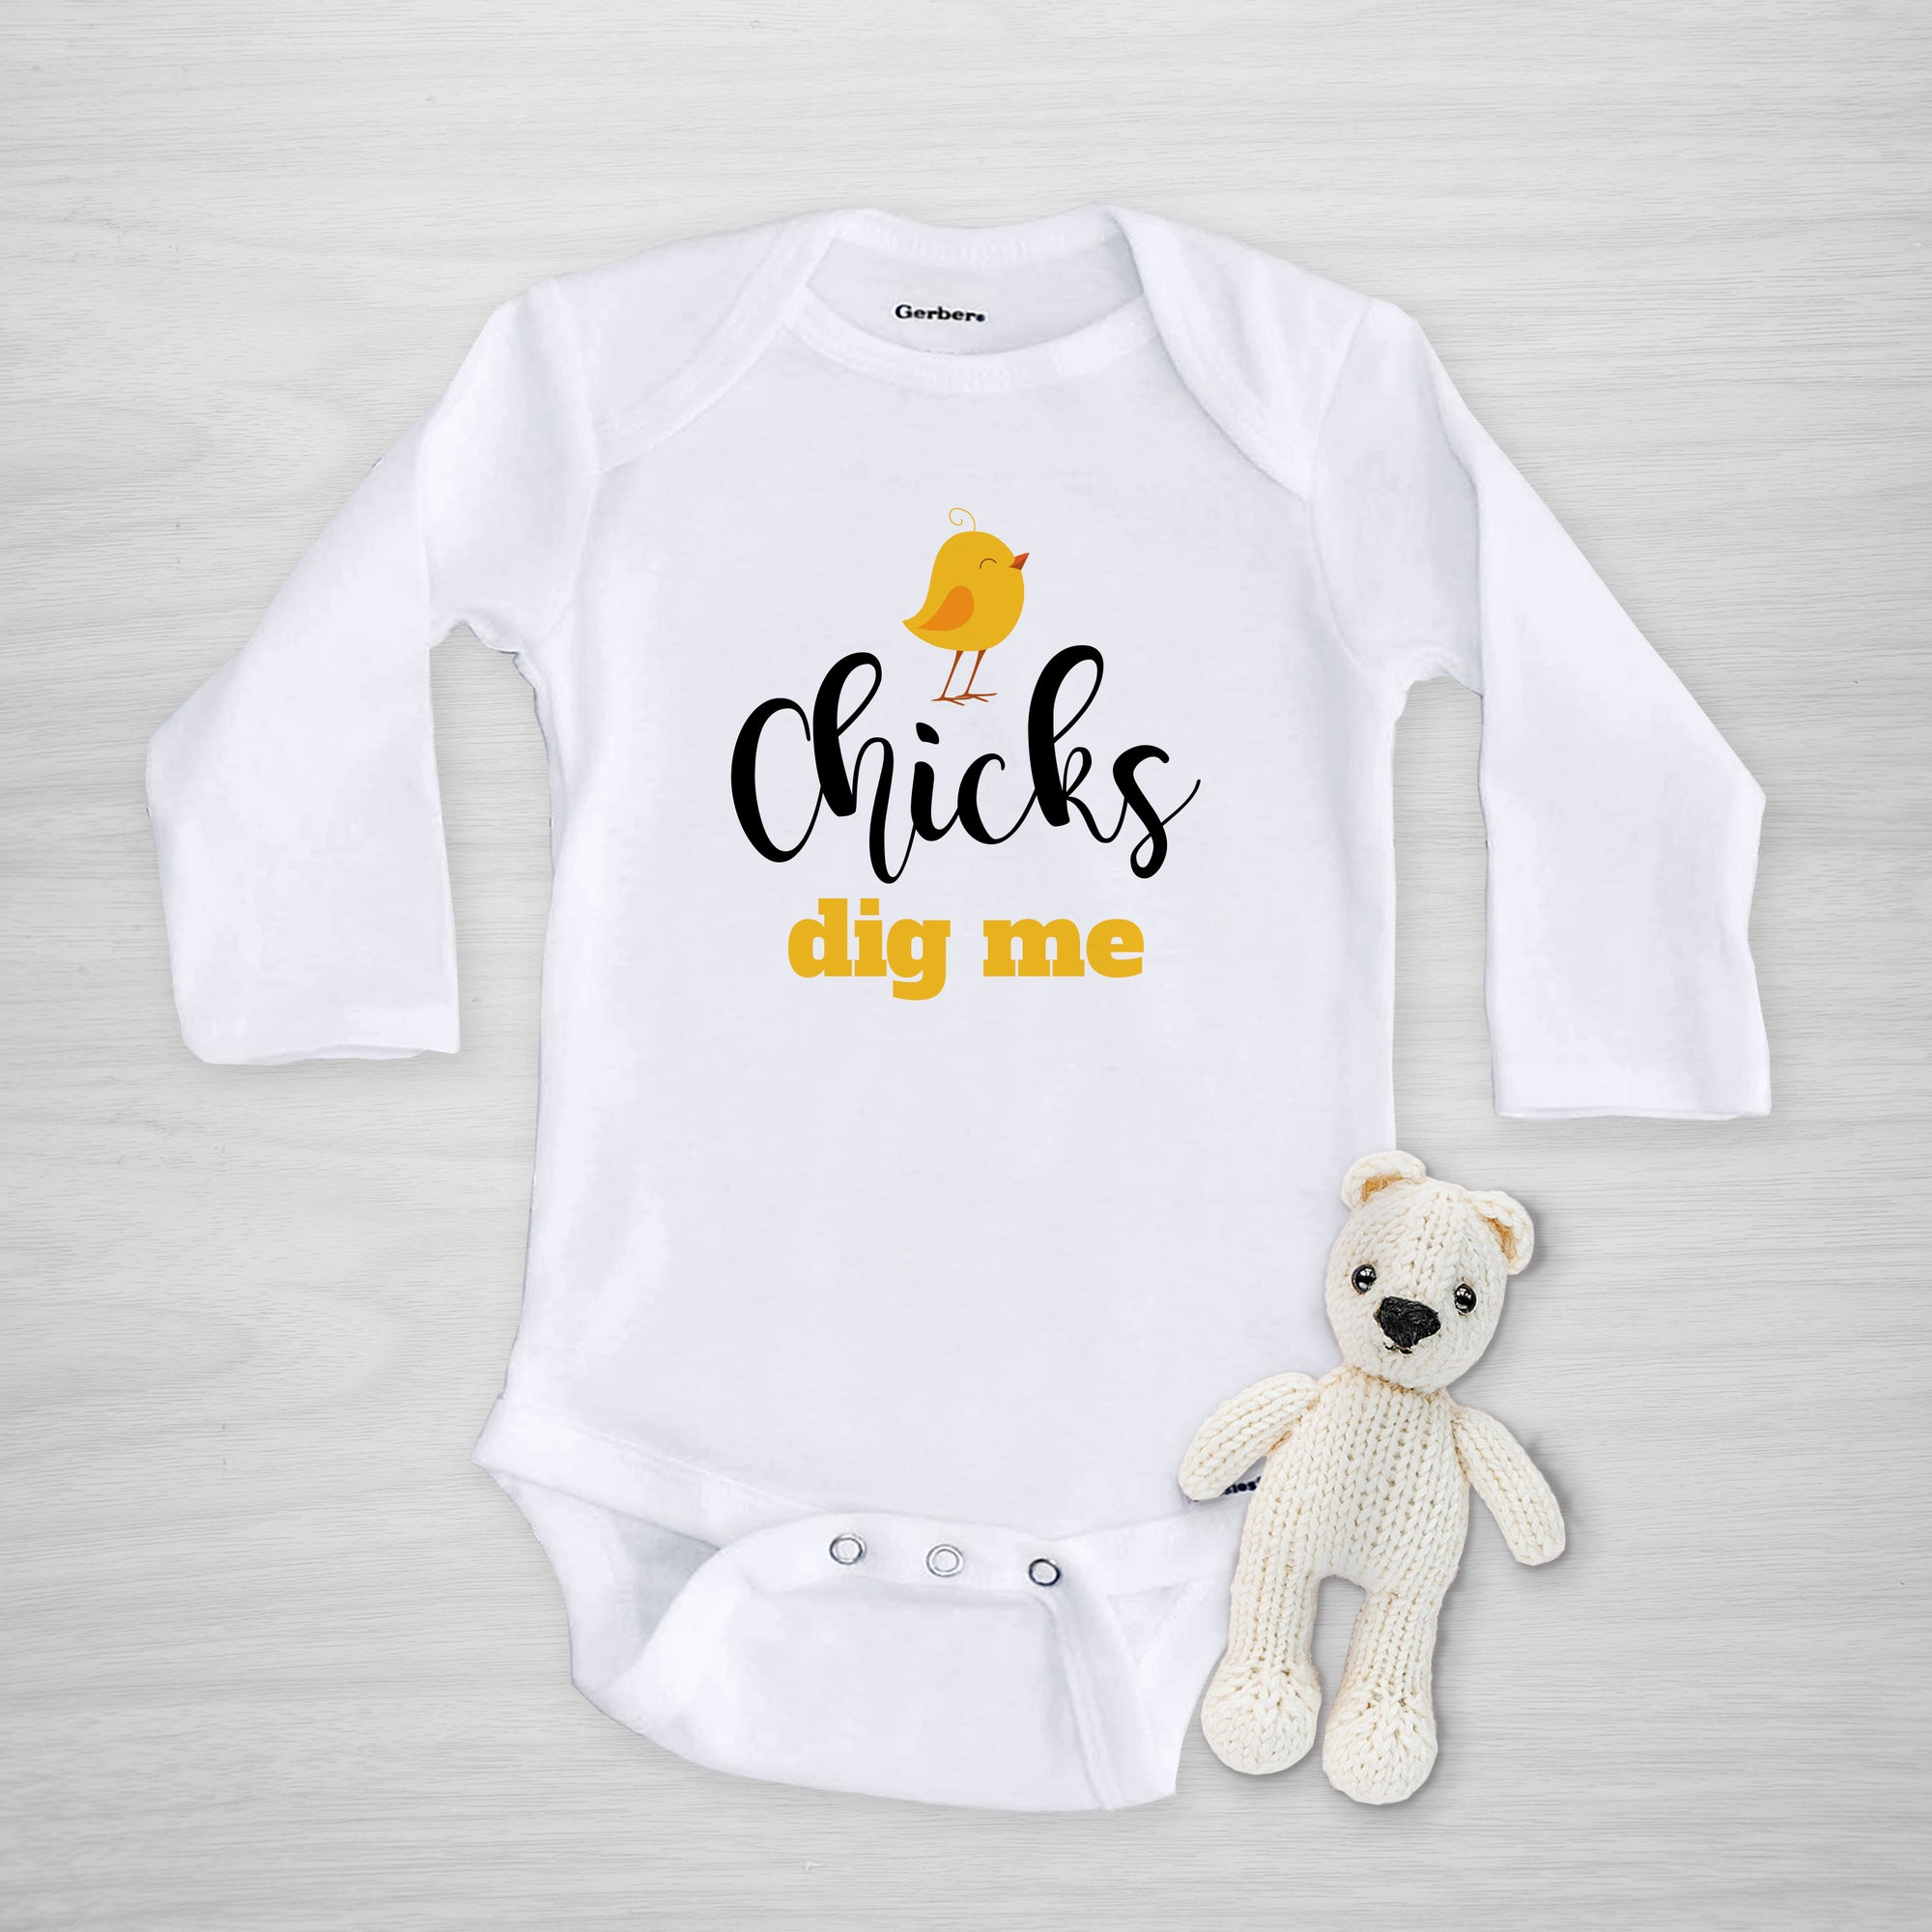 Chicks Dig Me Adorable Gerber Onesie - Perfect for Easter, long sleeved